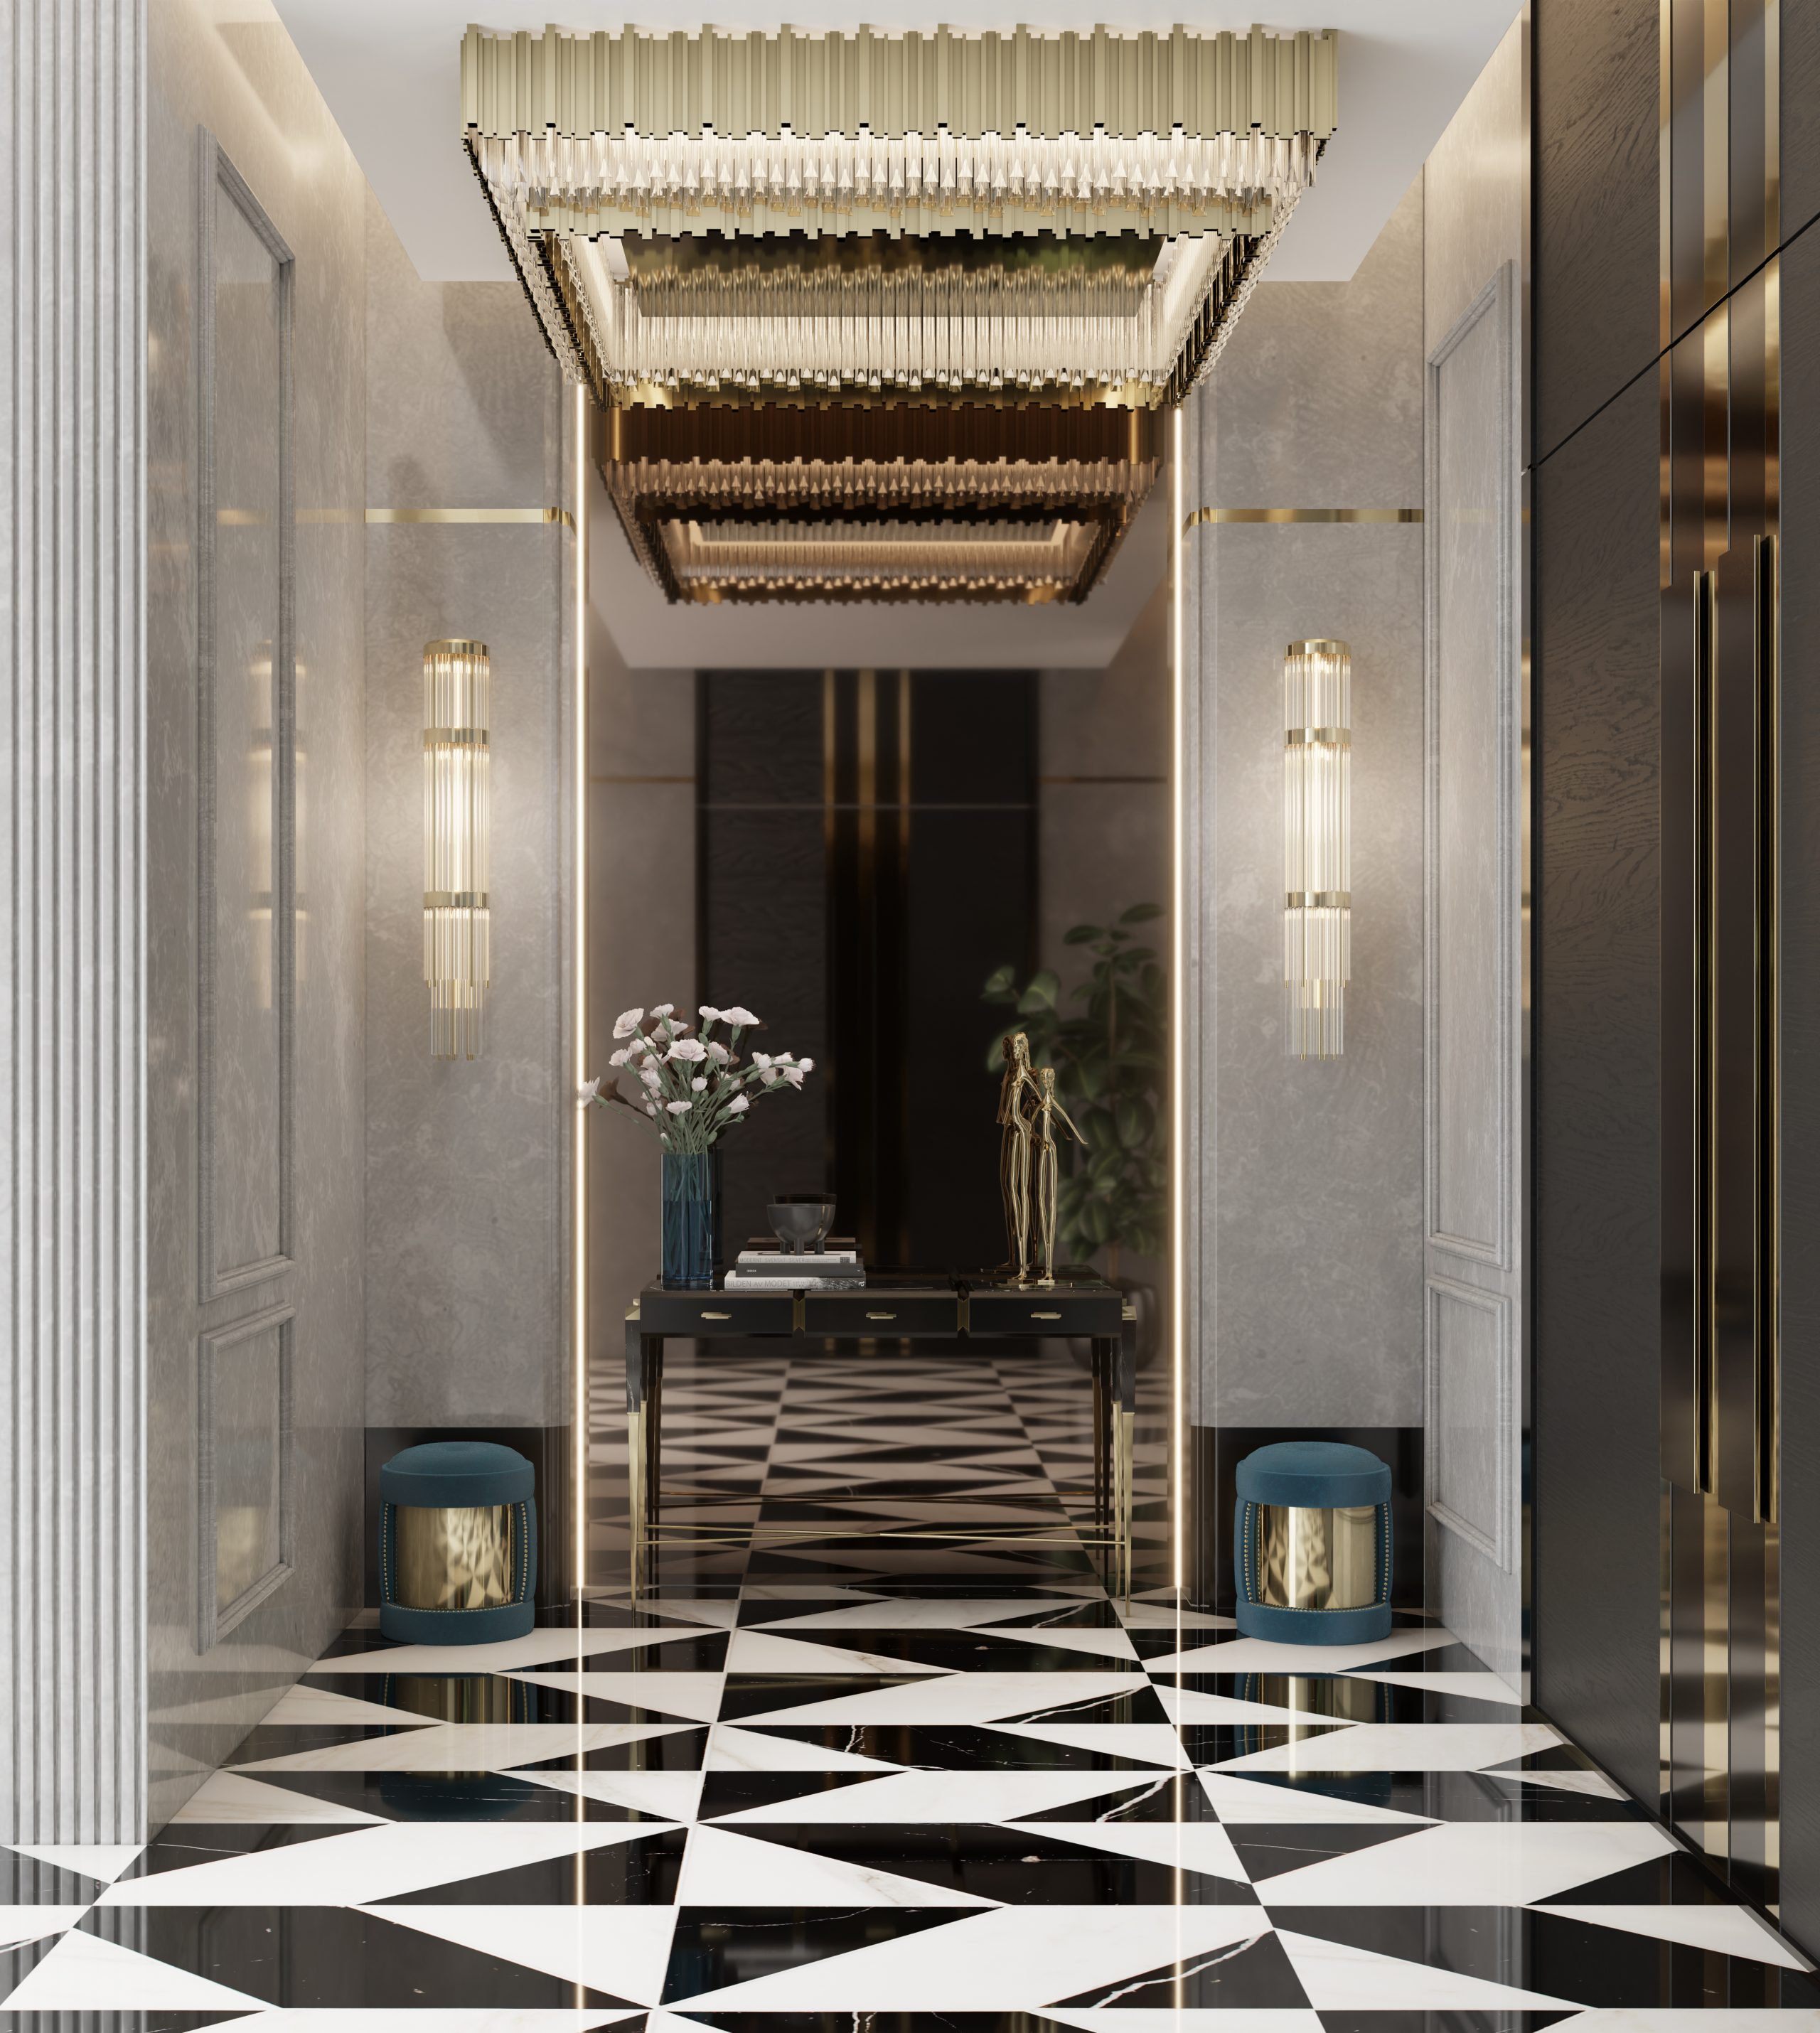 Entrance Lobby - Crucial Role of Lighting Fixtures